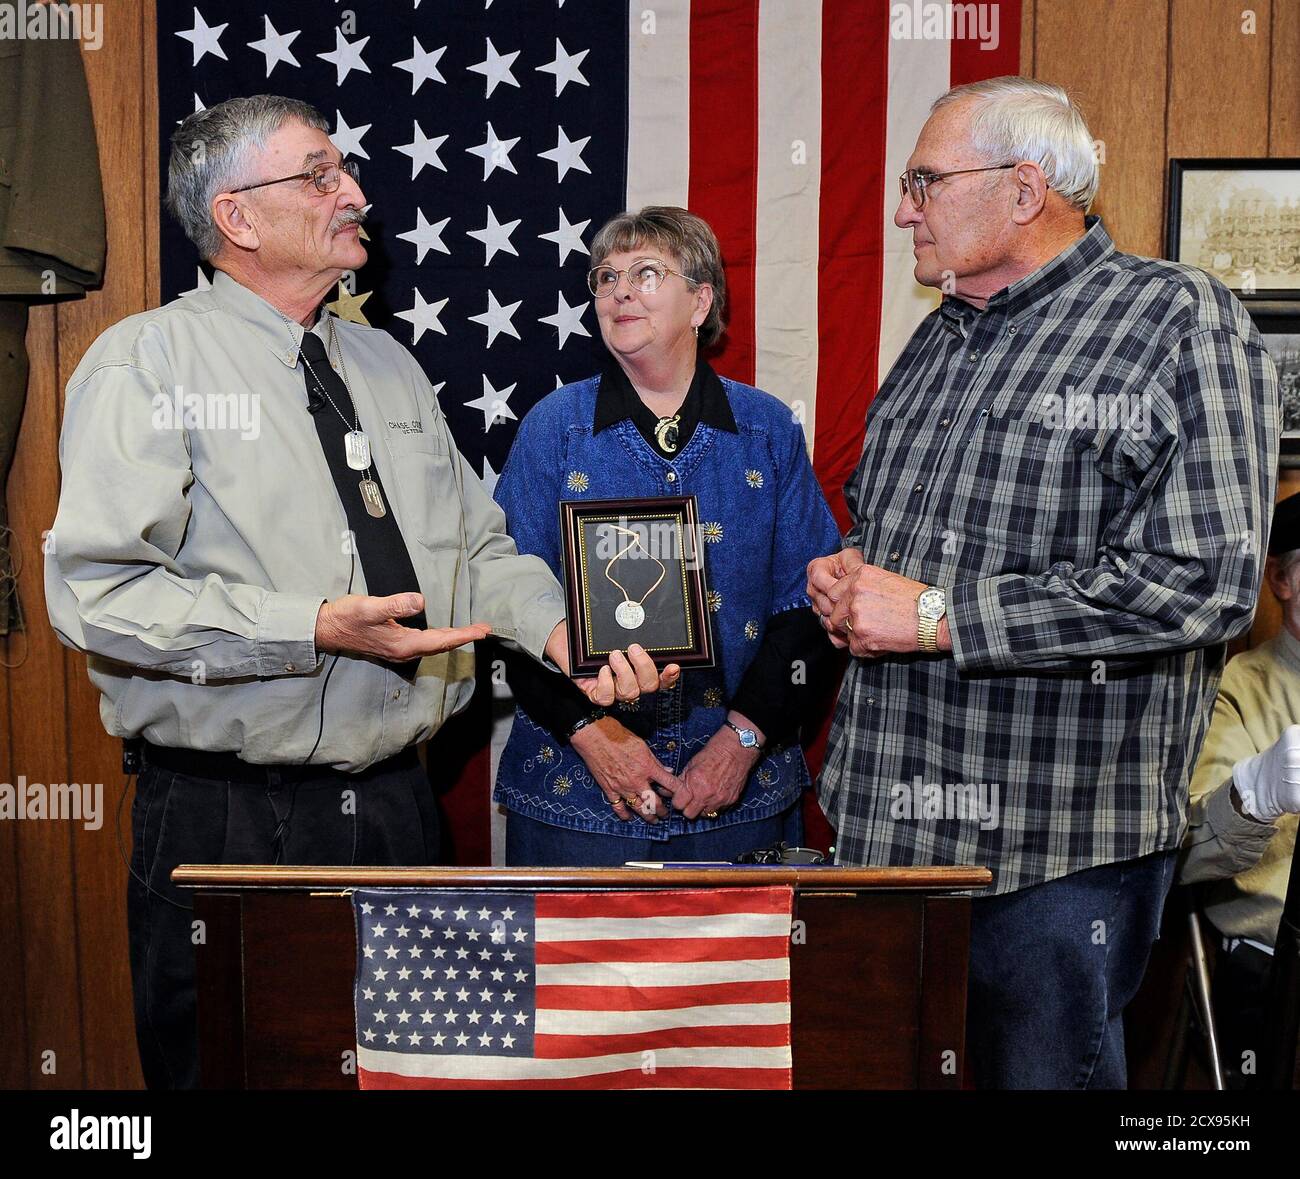 Retired U.S. Army Colonel Charles Rayl (L) presents Dale Potter (R) with  his father's lost World War I dog tag, as Potter's wife Dixie looks on,  during a ceremony in Cottonwood Falls,